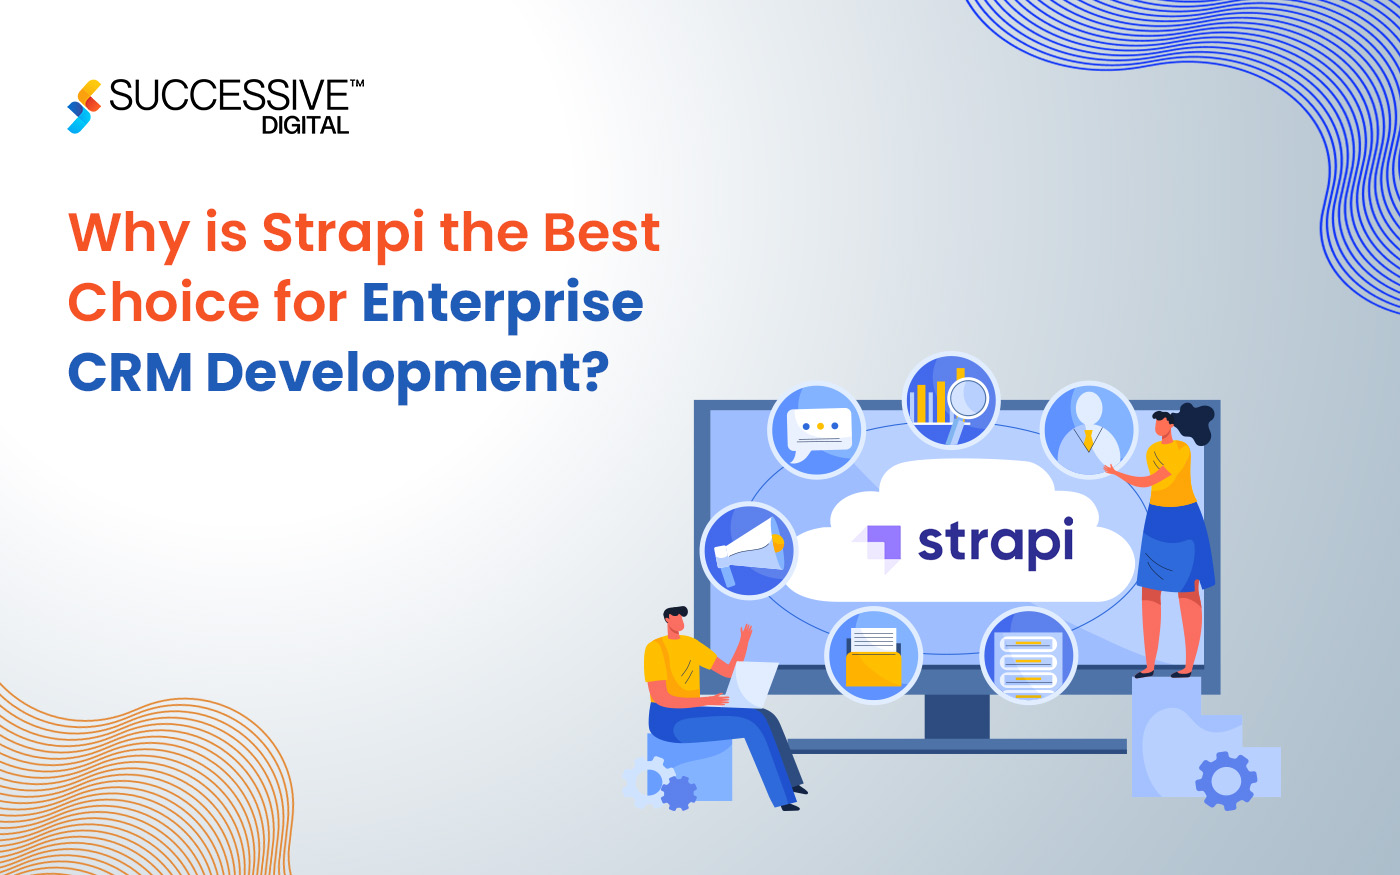 Why is Strapi the Best Choice for Enterprise CRM